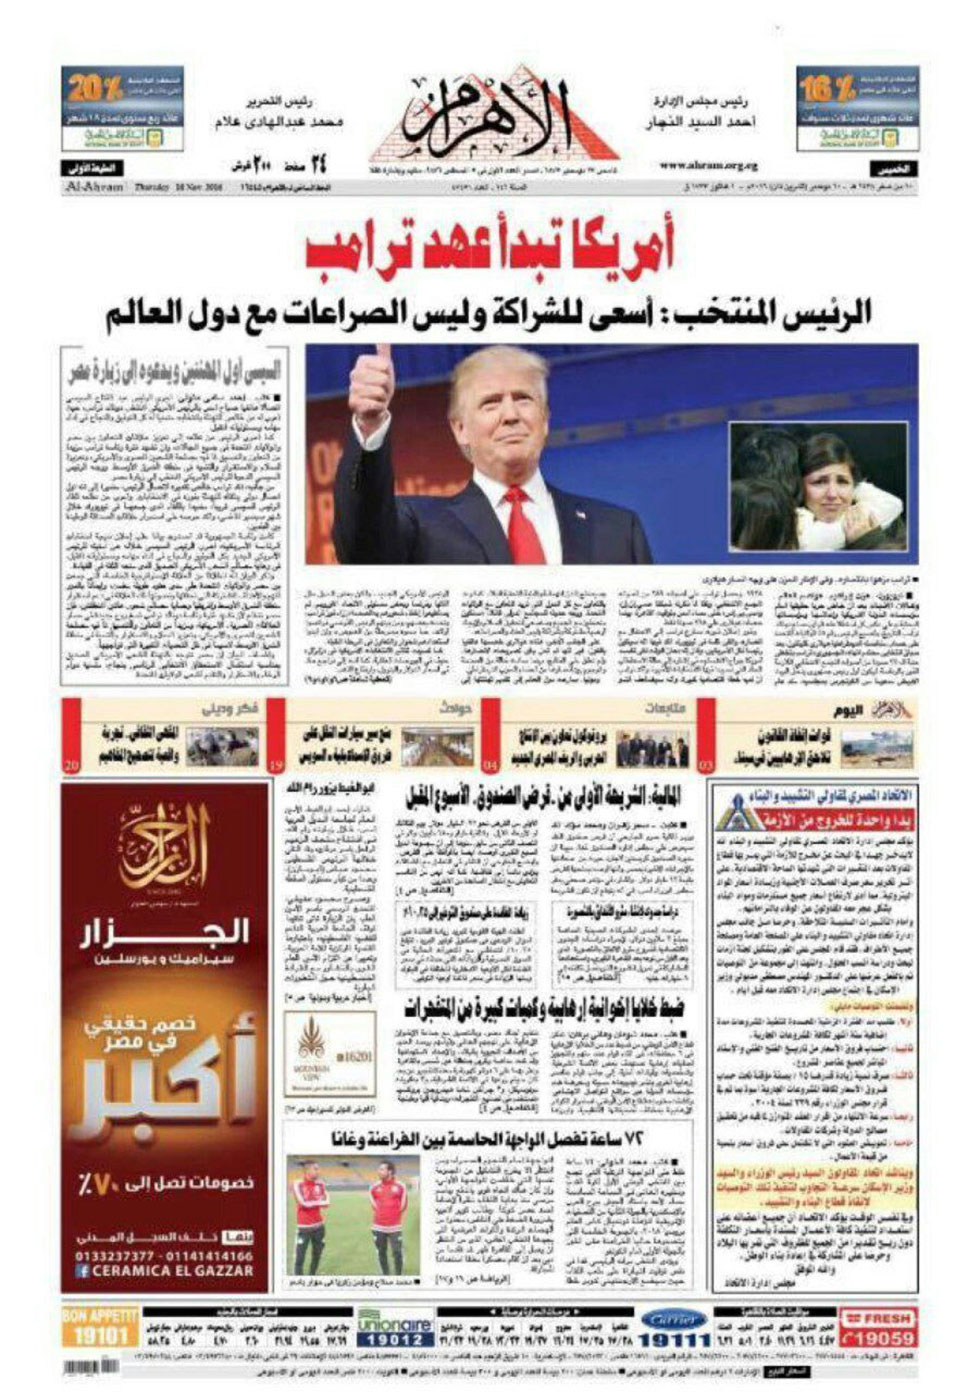 Frontpage of Egyptian Al-Ahram Quotes Trump: 'I seek partnerships around the world, not conflict'